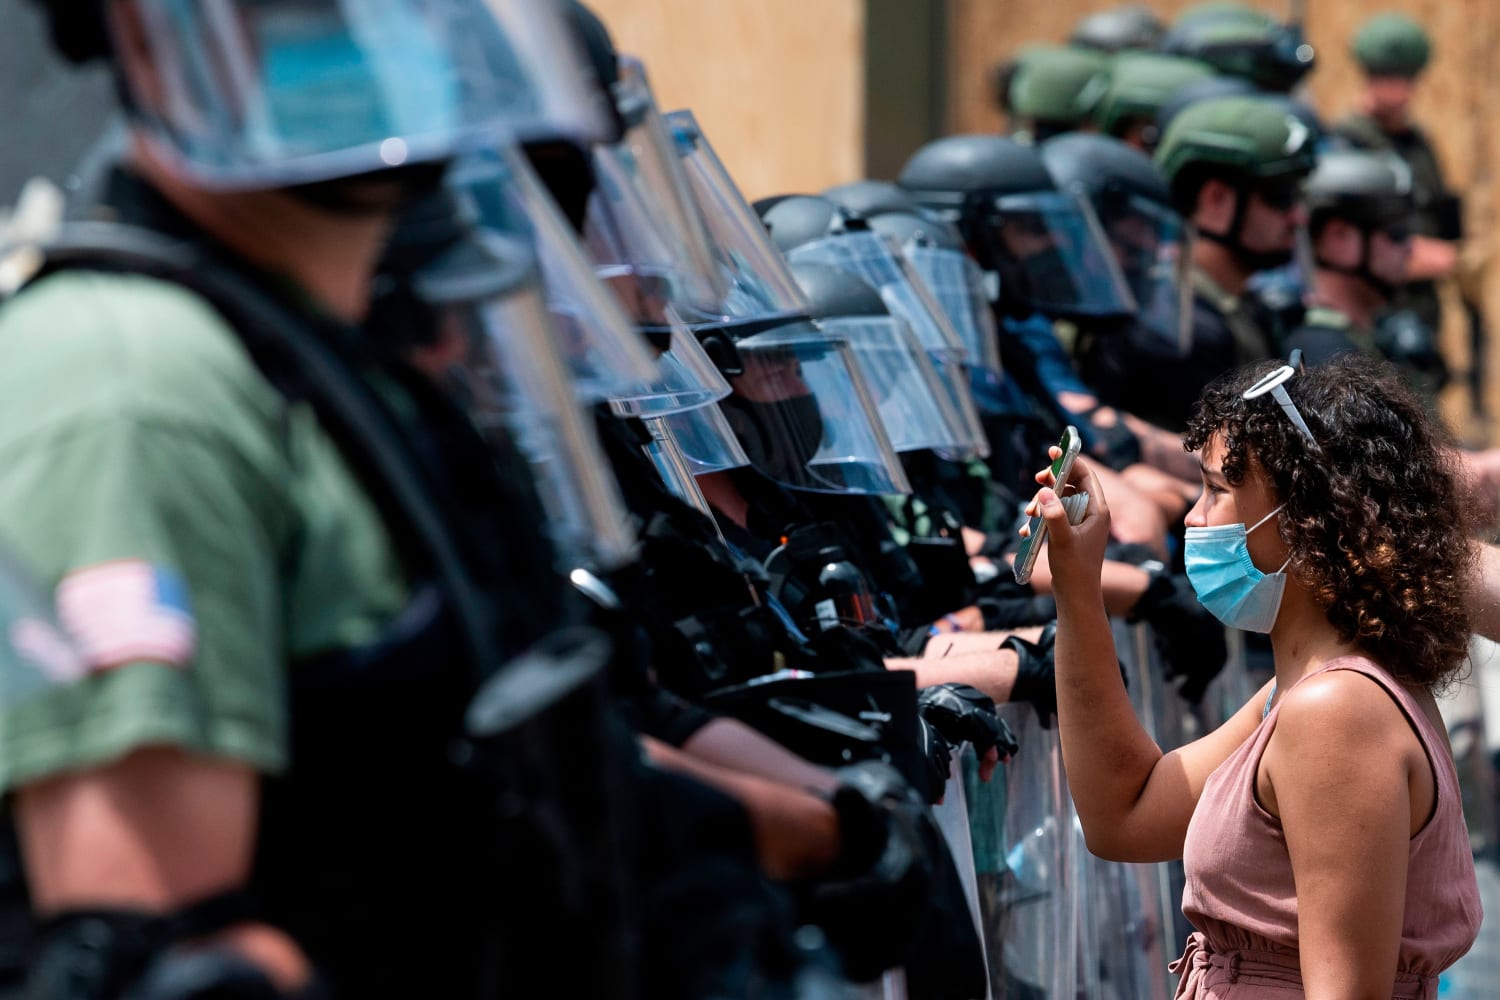 The 13 High-Tech Tools Used by Protestors and Cops In Their Escalating Battle